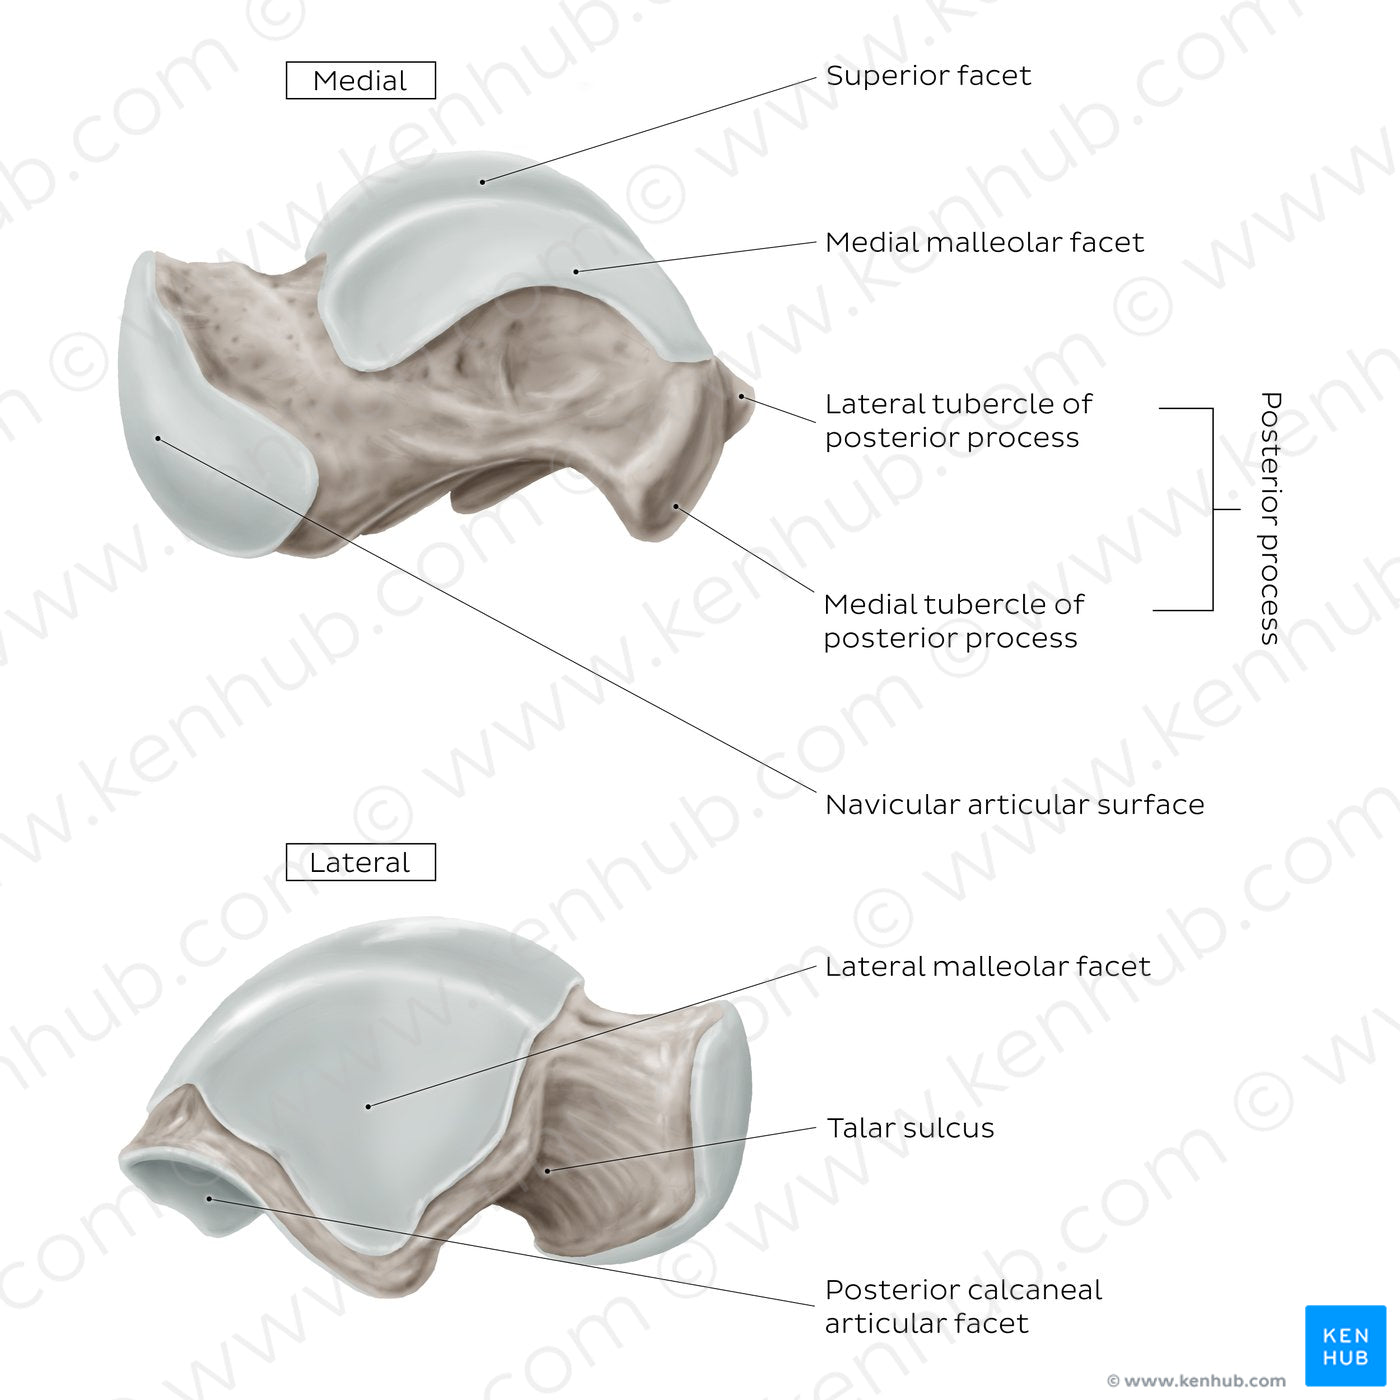 Talus (Medial and lateral view) (English)